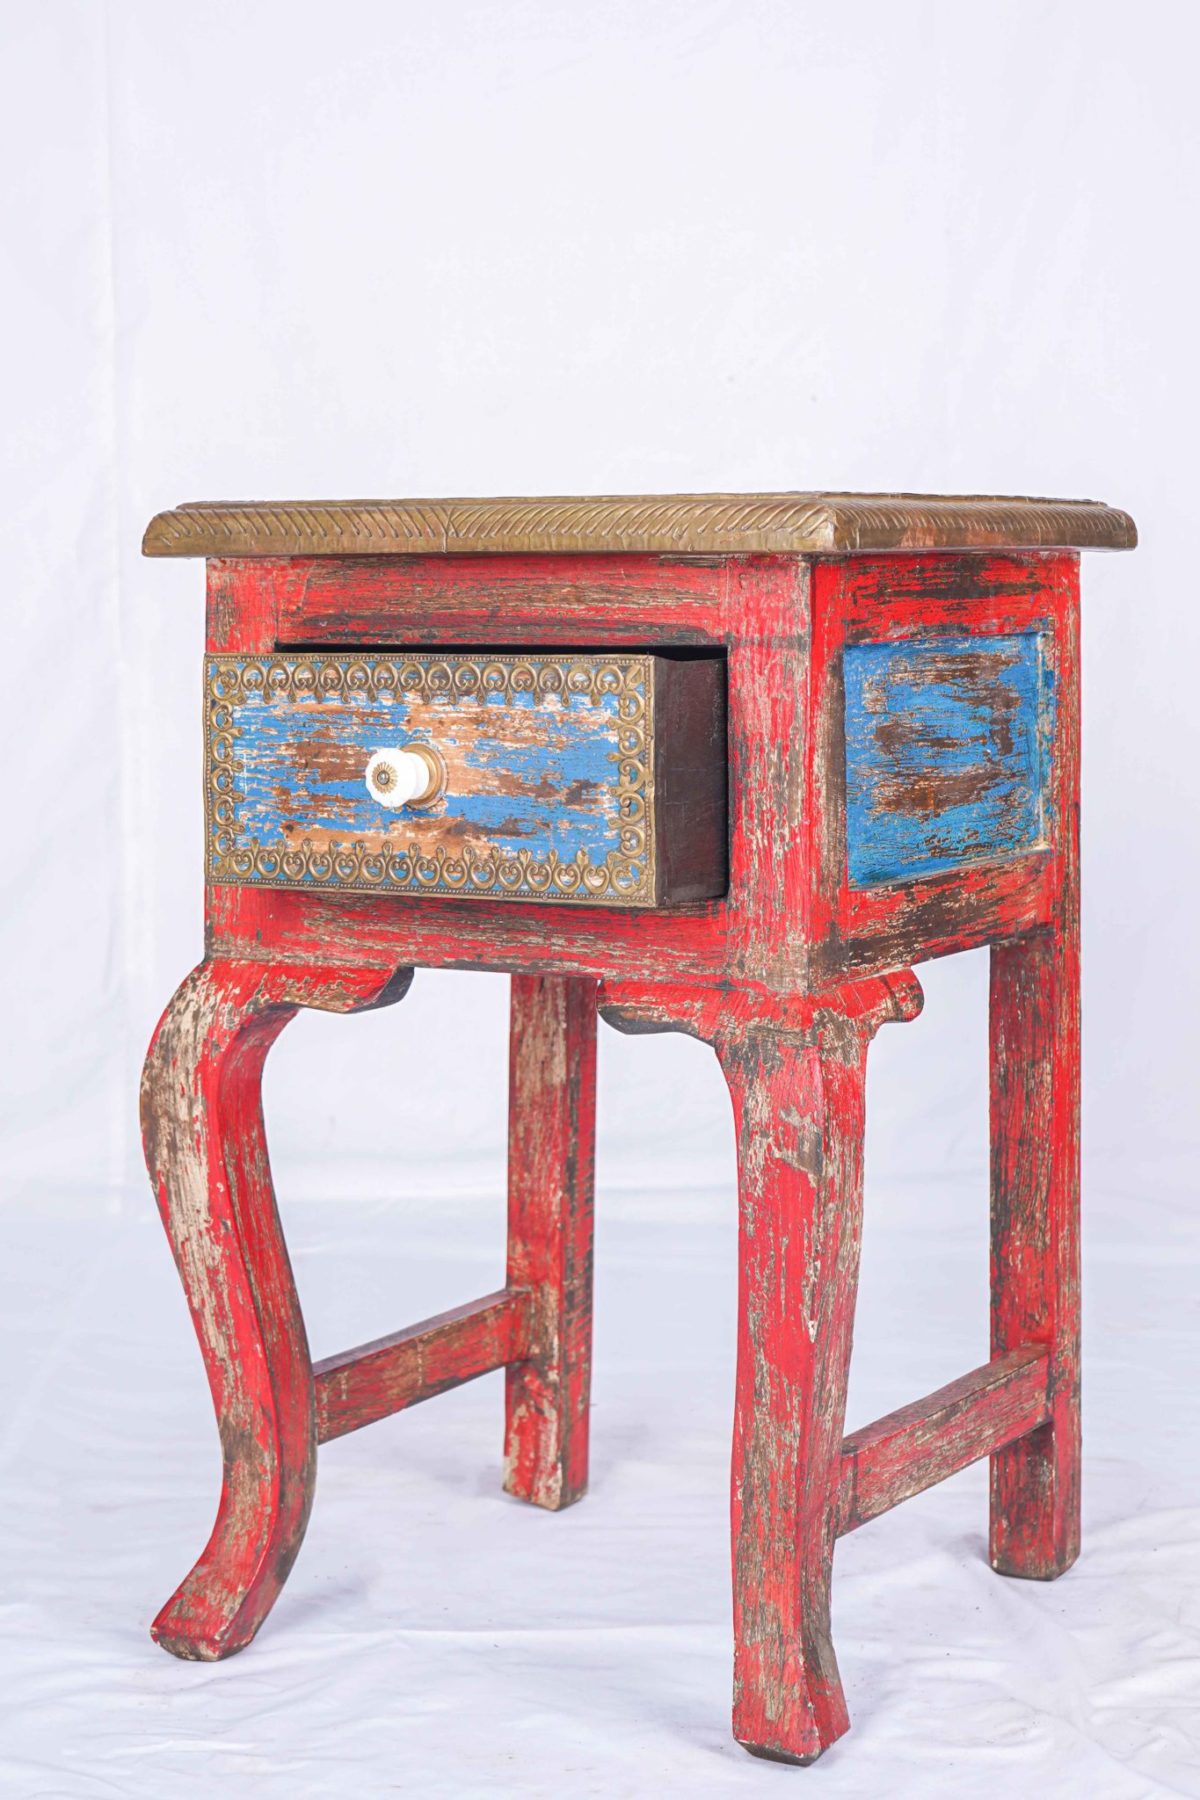 Antique Red Furniture Handmade Wood Carved Nightstand